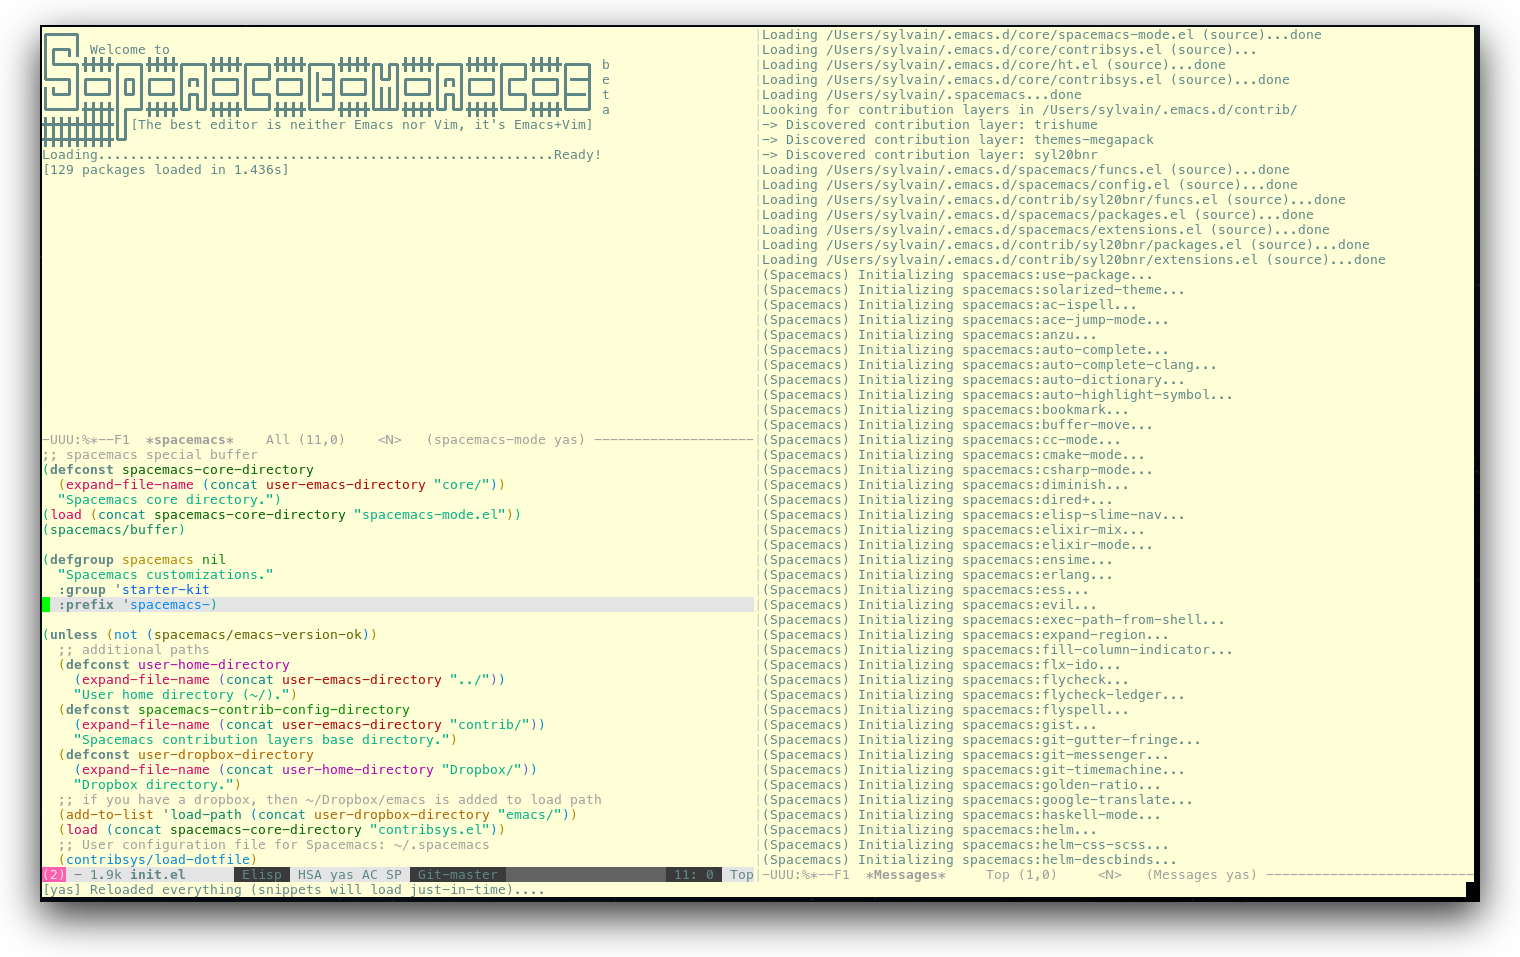 /TakeV/spacemacs/media/commit/5895e0e45fd1f2e85ee64403d3f2ca025711d91d/doc/img/spacemacs-urxvt.png